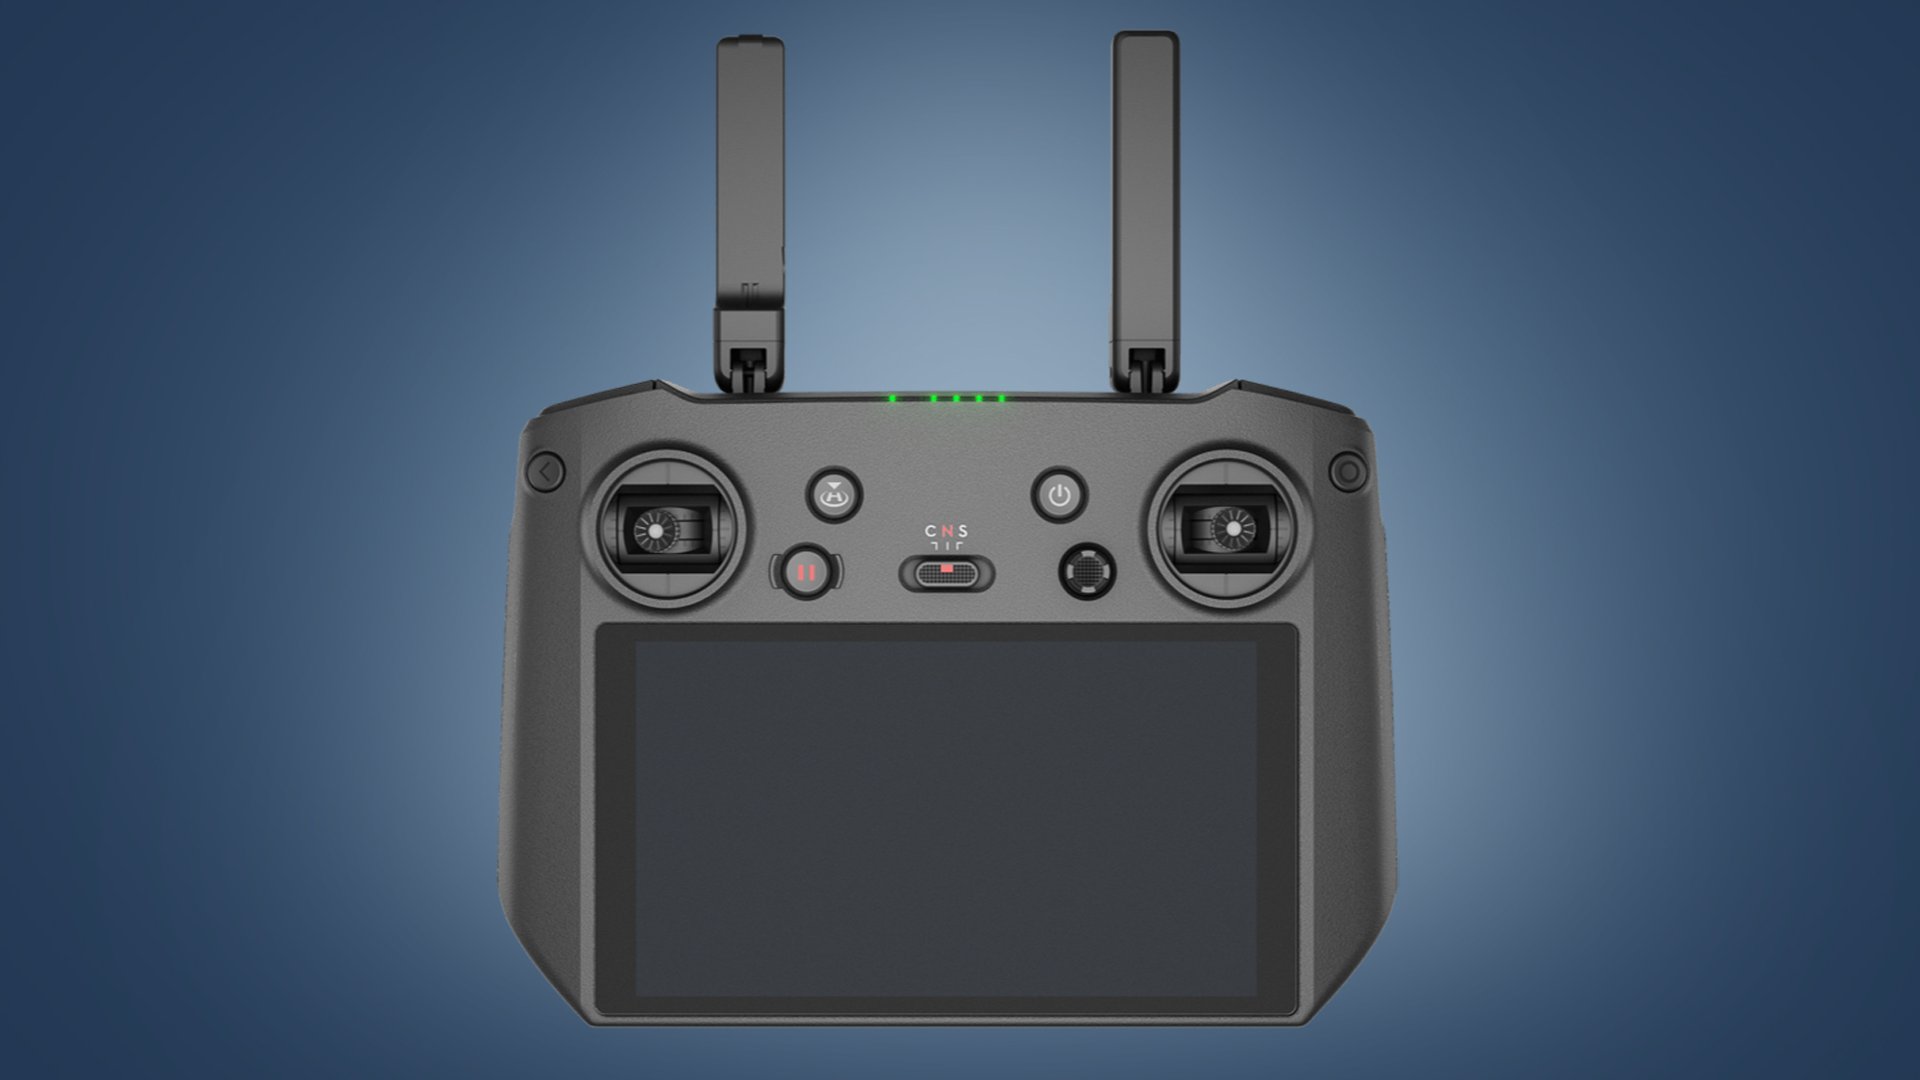 DJI RC Pro drone controller on a blue background